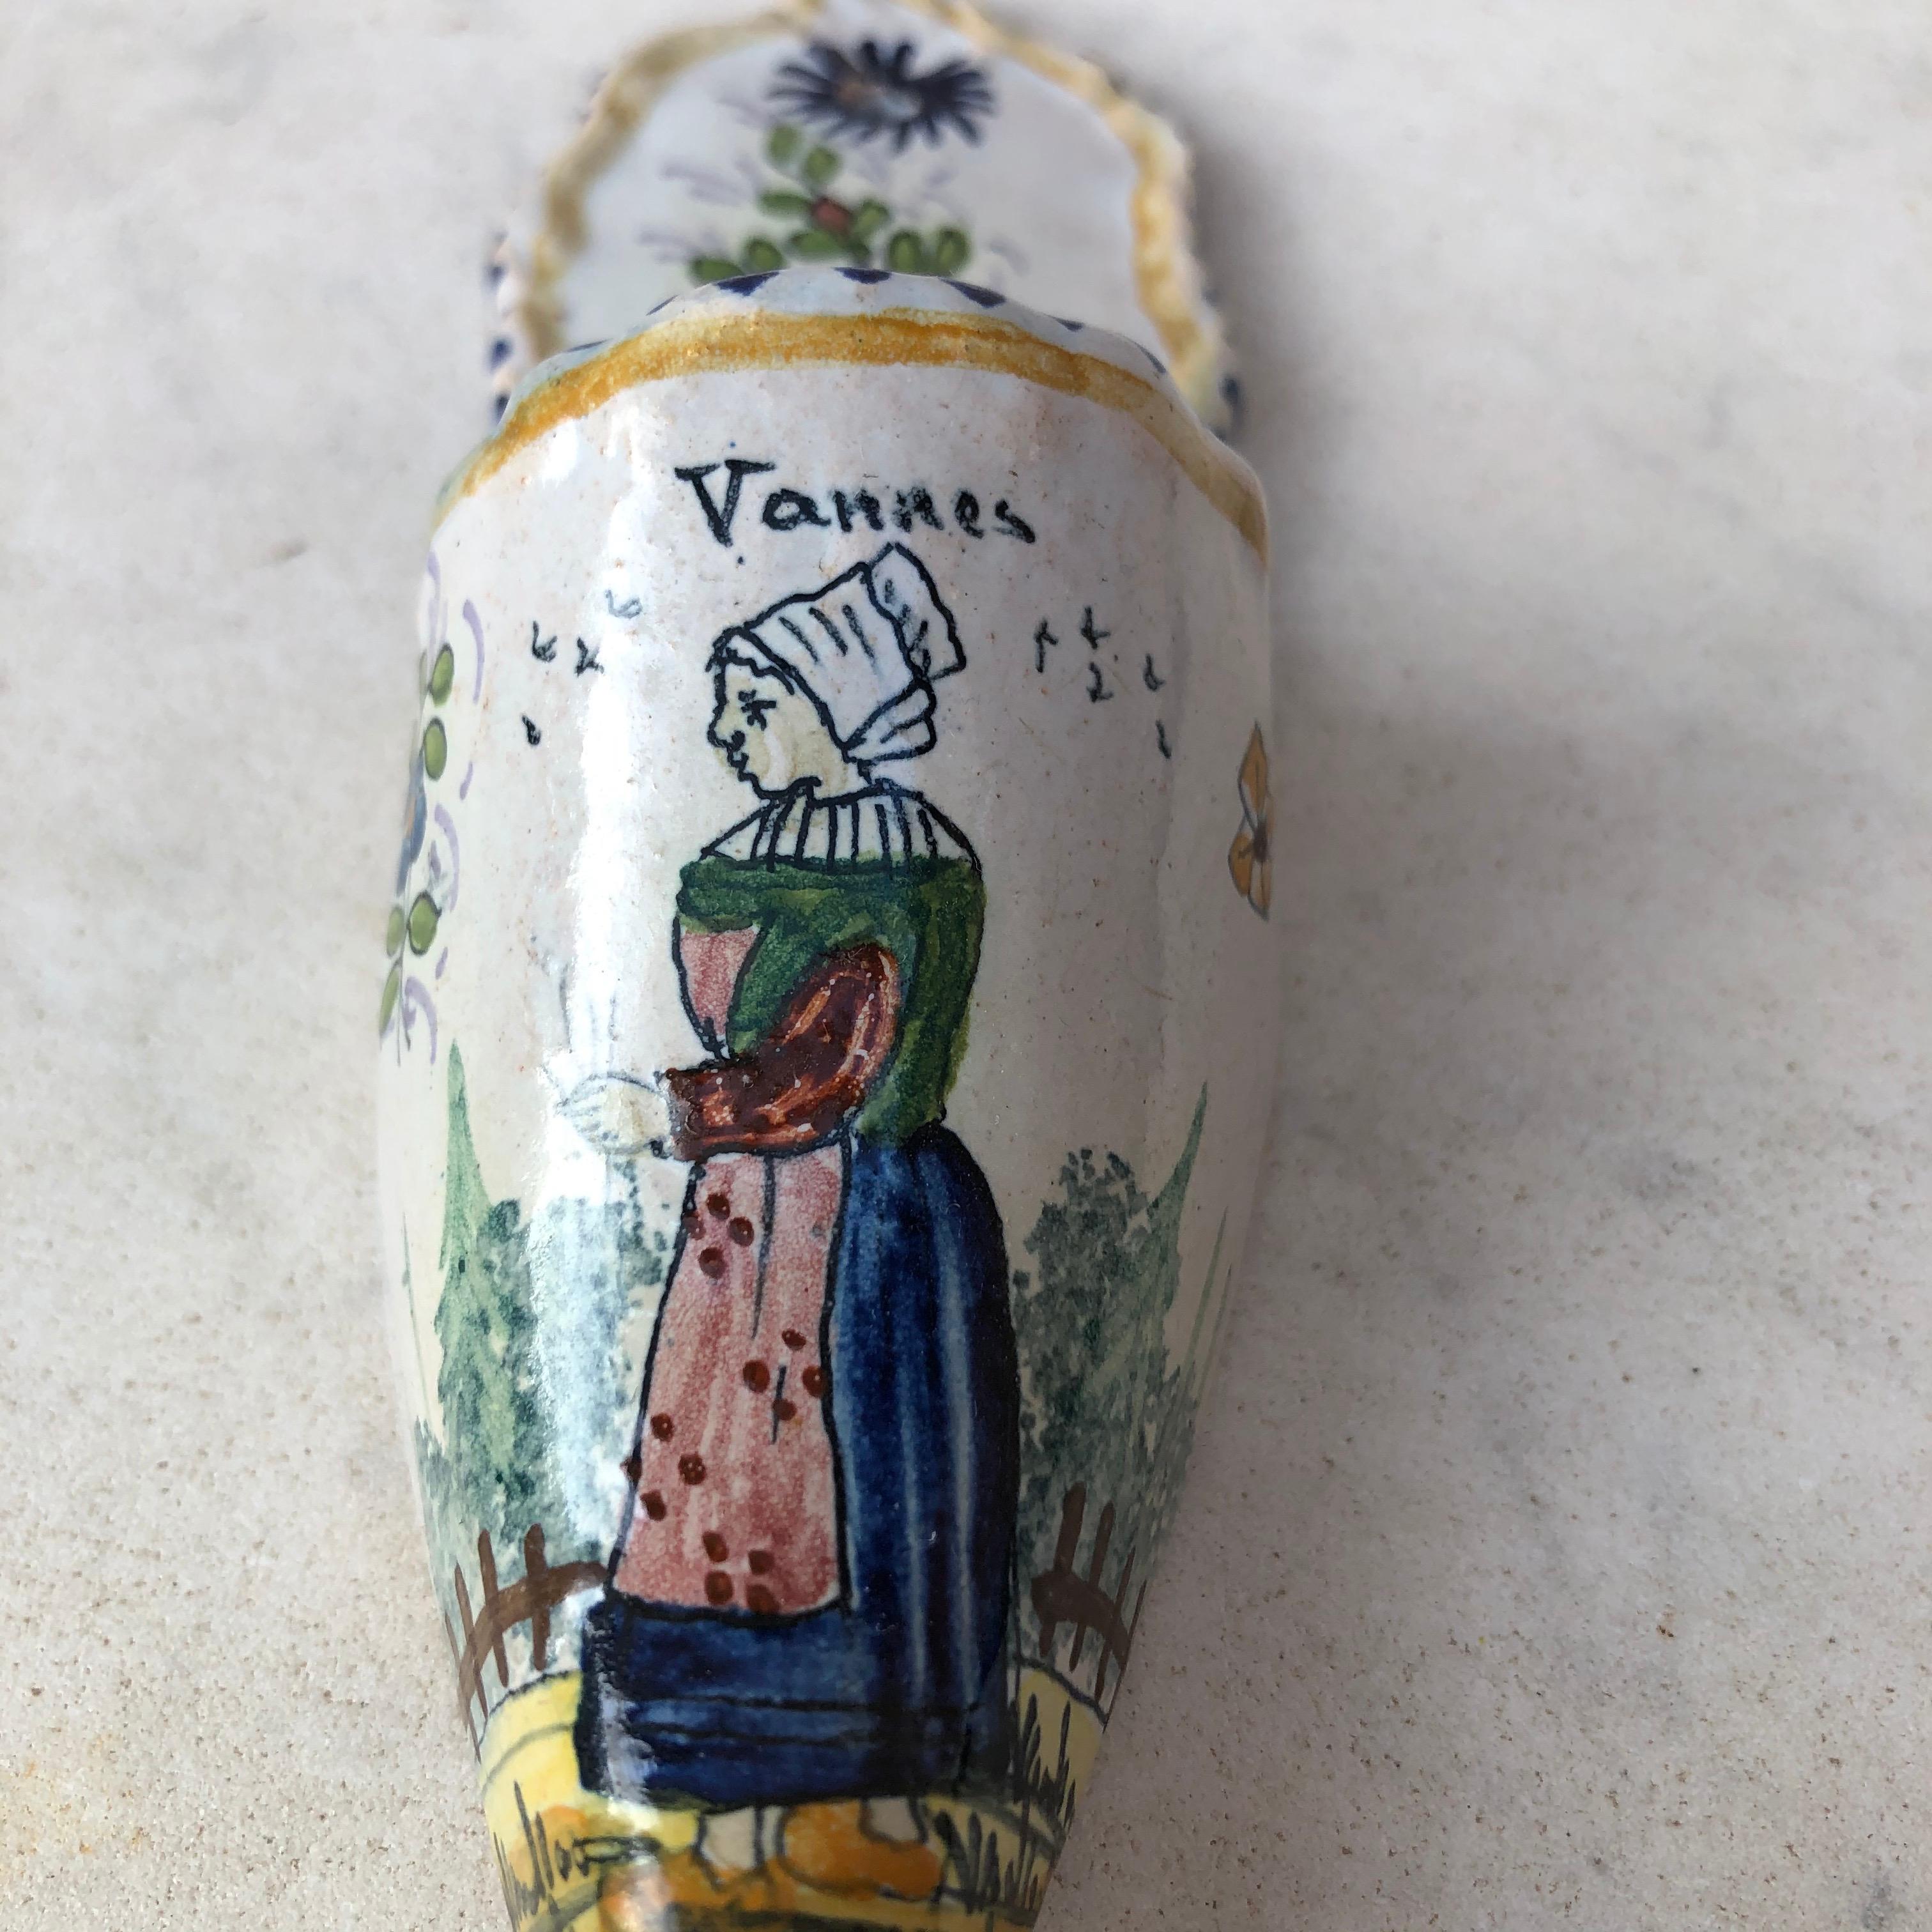 Small French faience shoe wall pocket, circa 1900.
From Brittany signed Vannes in the front.
Hand painted with a farmer from Brittany and flowers.